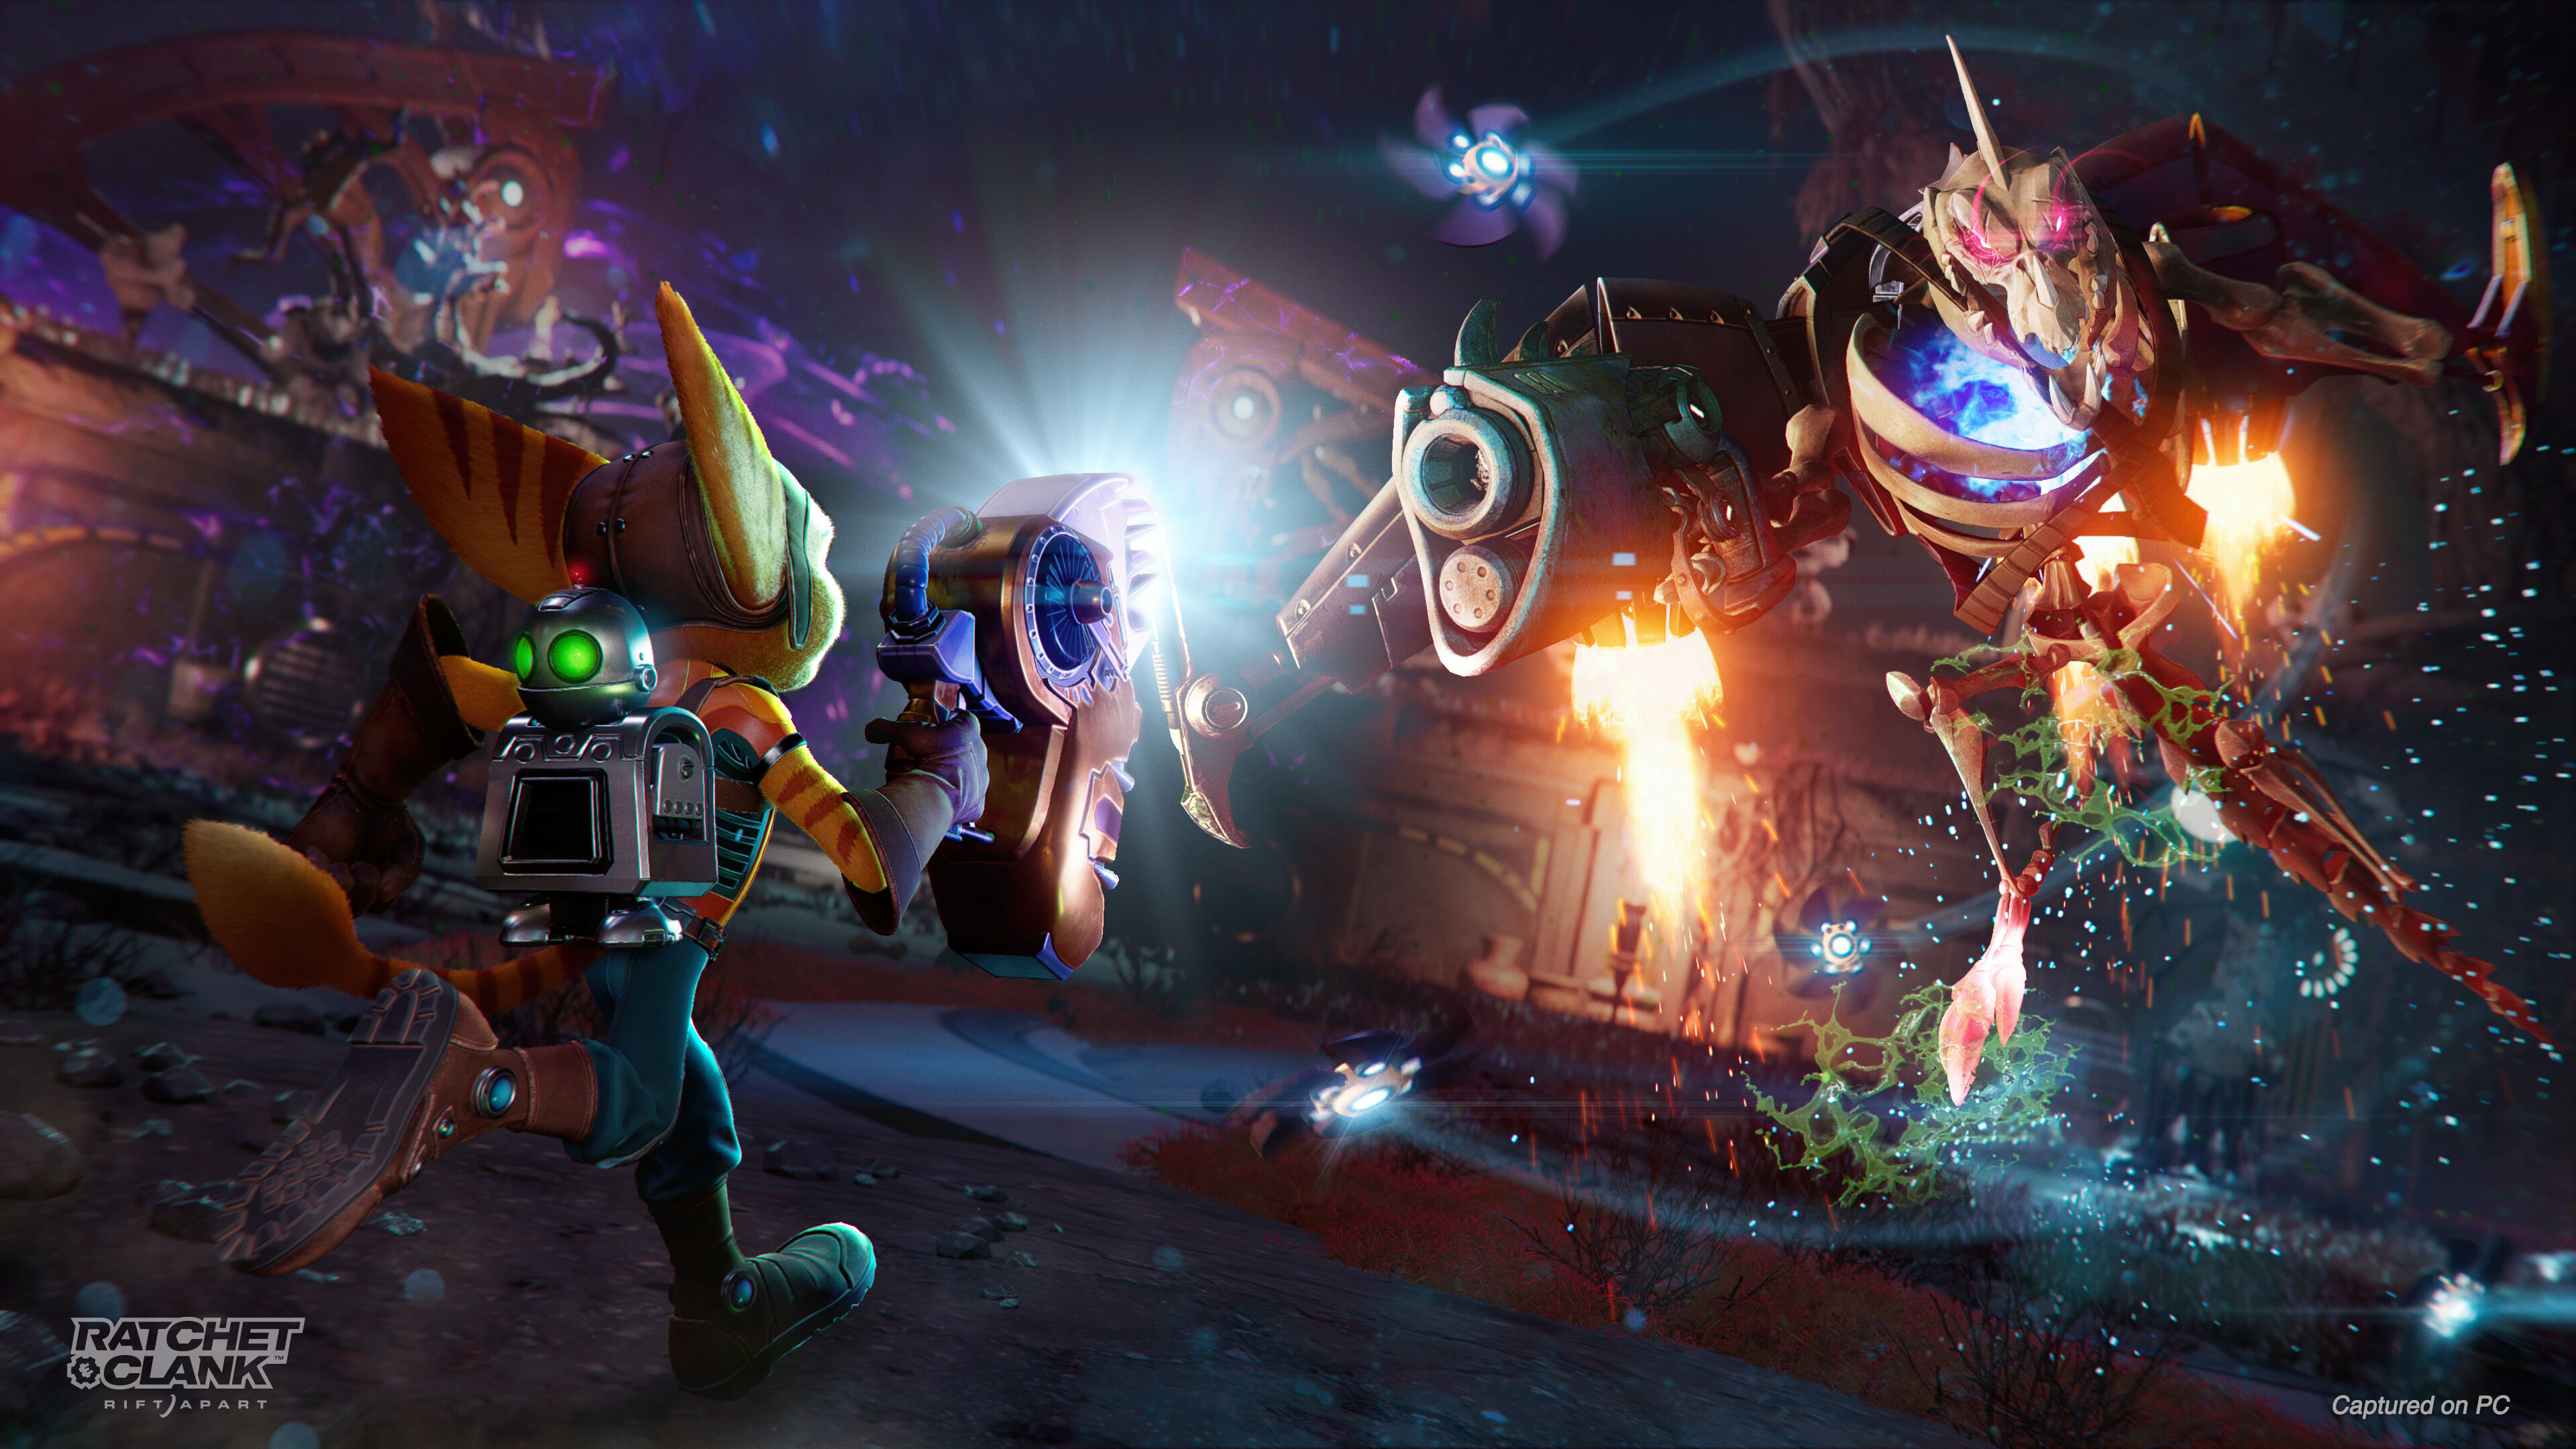 Ratchet & Clank: Rift Apart is heading to PC on July 26th - The Verge